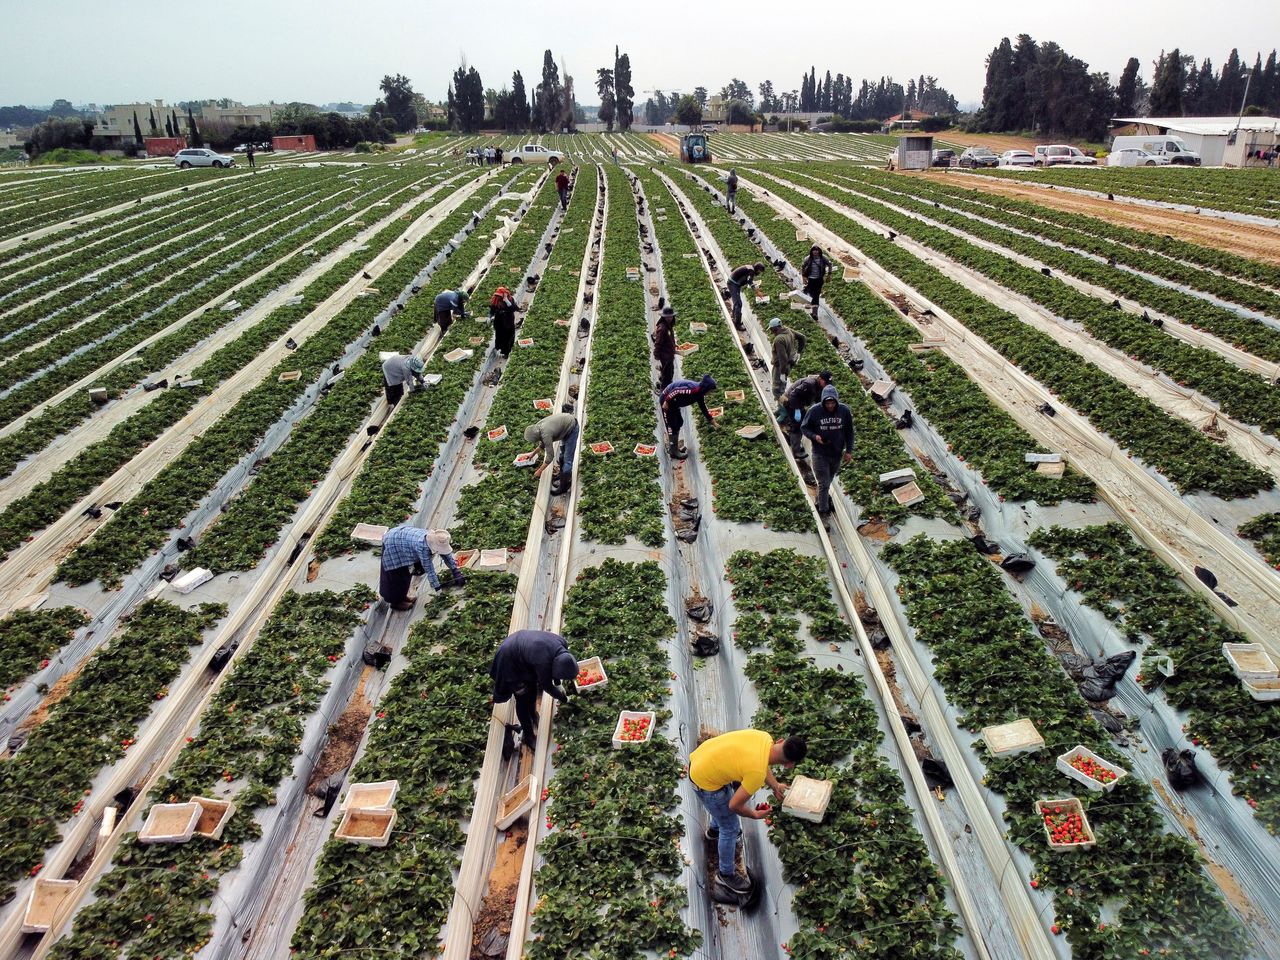 Workers pick strawberries at the field of Tzahi Ariel after a giant strawberry, weighing 289 gram and grown by him in Israel, sets a new Guinness record in Kadima, Israel February 17, 2022. Picture taken with a drone. REUTERS/Amir Cohen